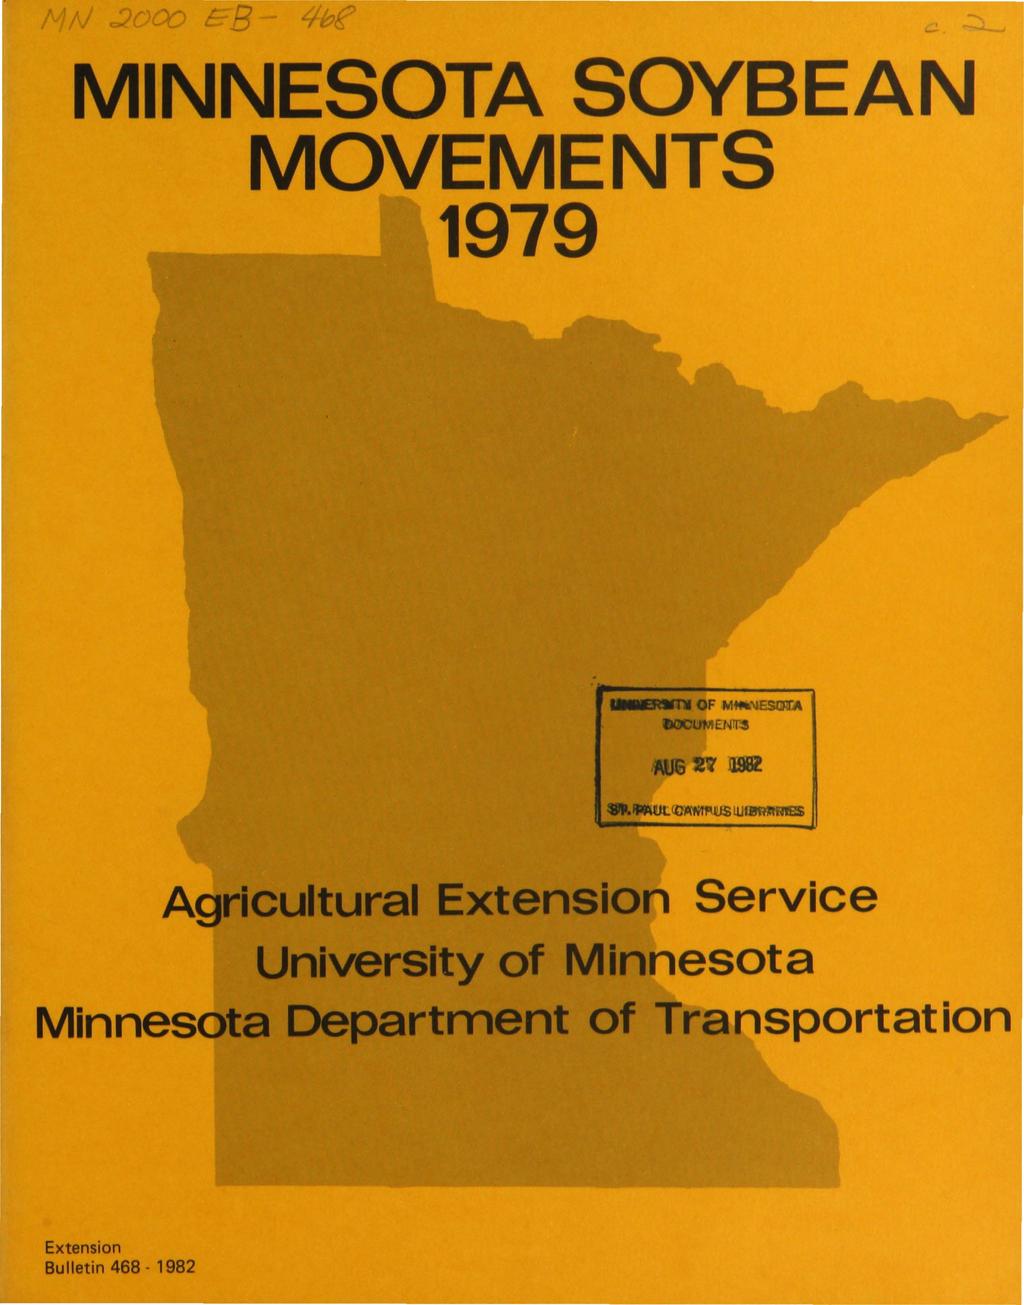 MINNESOTA SOYBEAN MOVEMENTS 1979 Agricultural Extension Service University